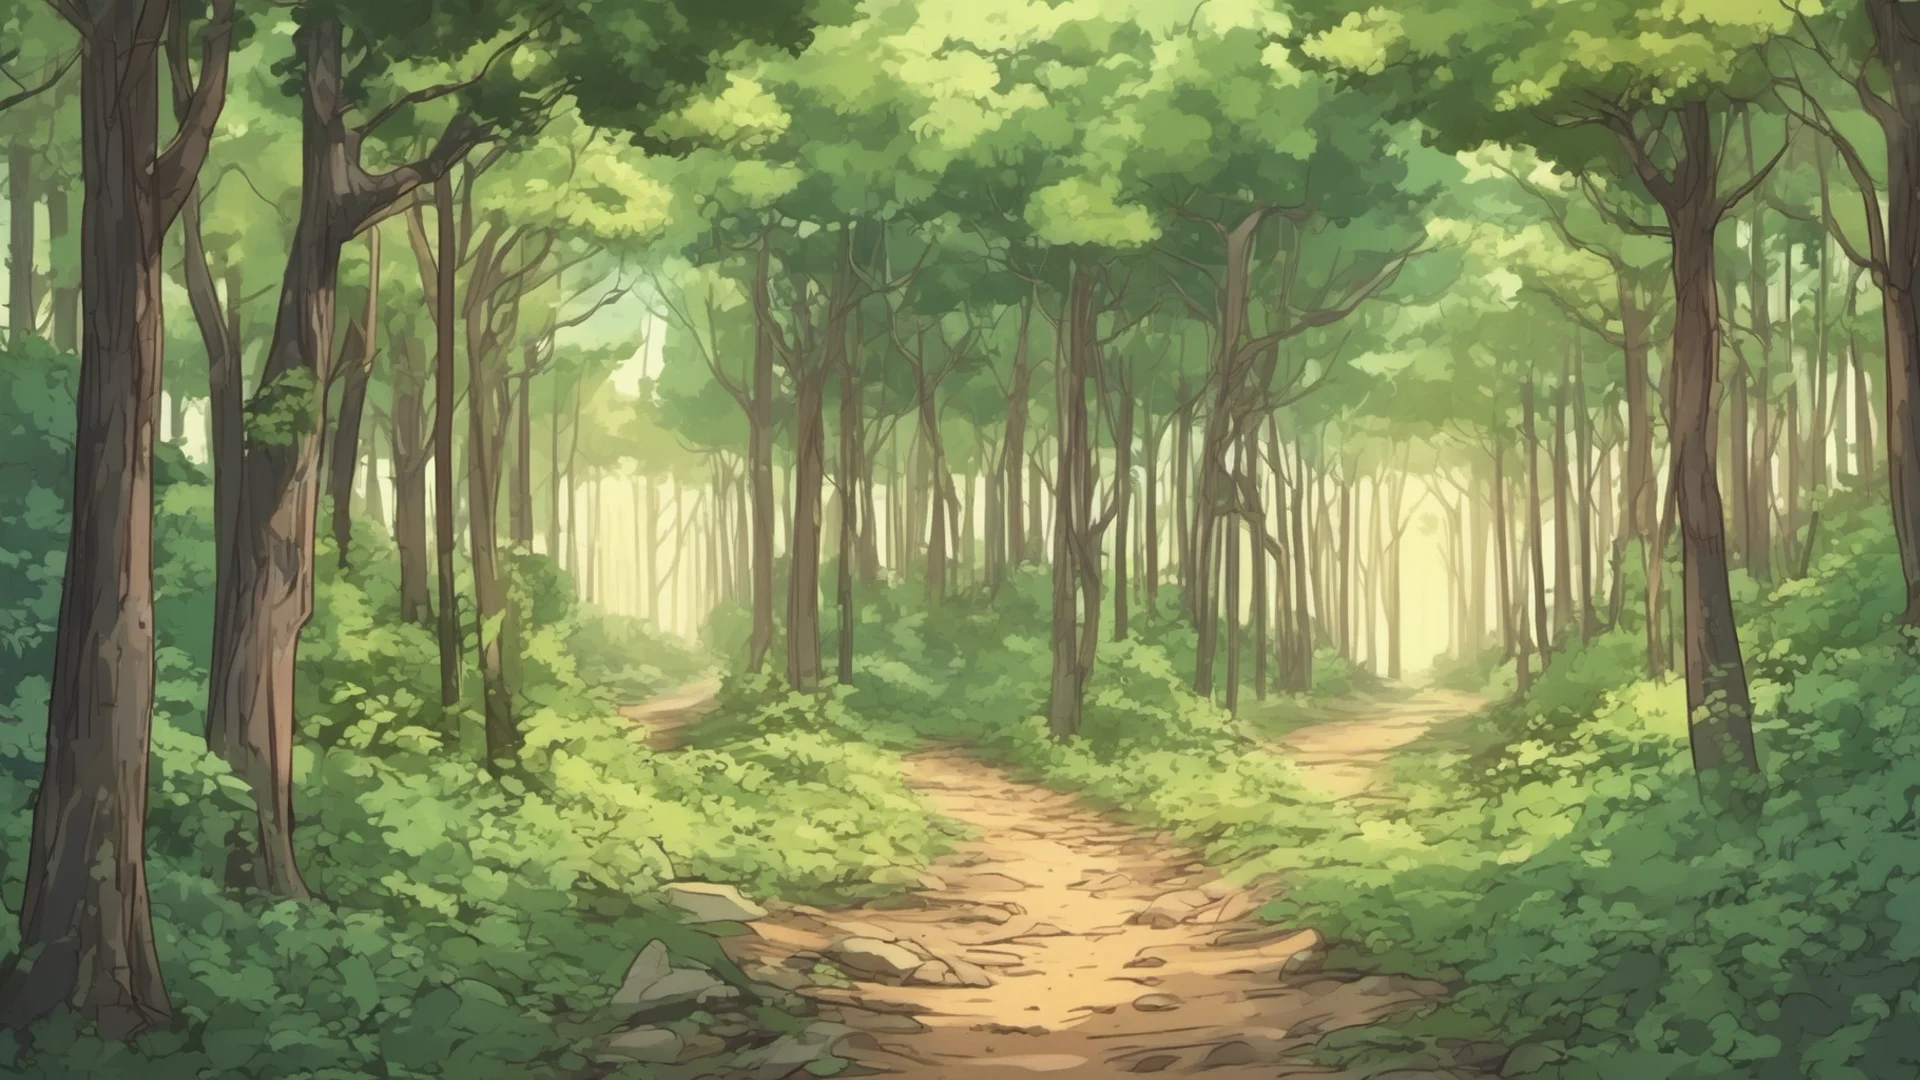 aianime style summer forest with a dirt path in the middle amazing awesome portrait 2 wide